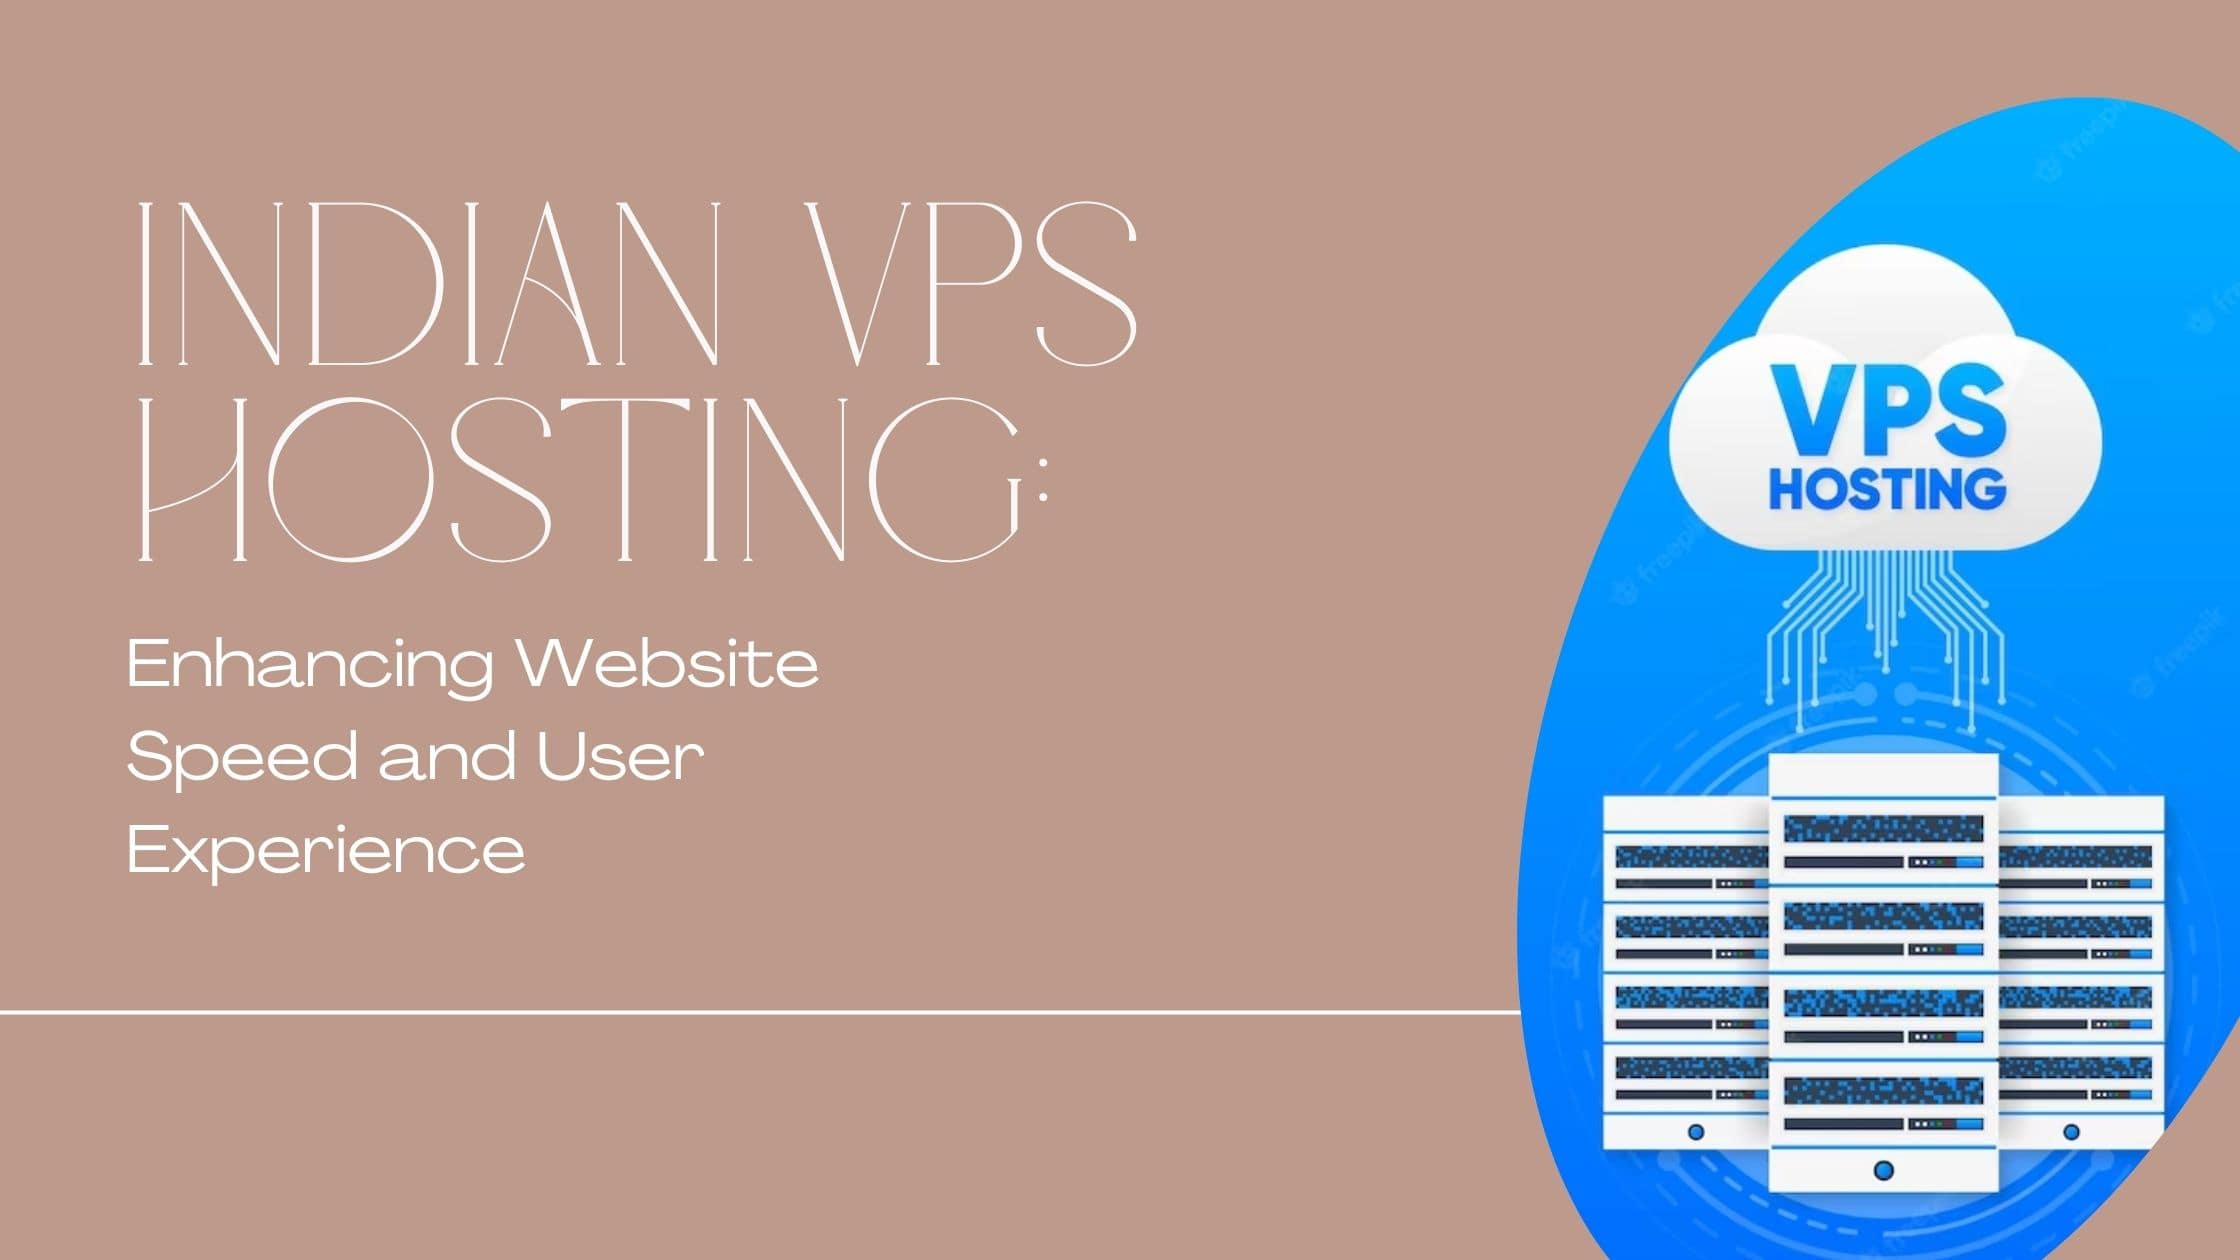 Indian VPS Hosting Enhancing Website Speed and User Experience